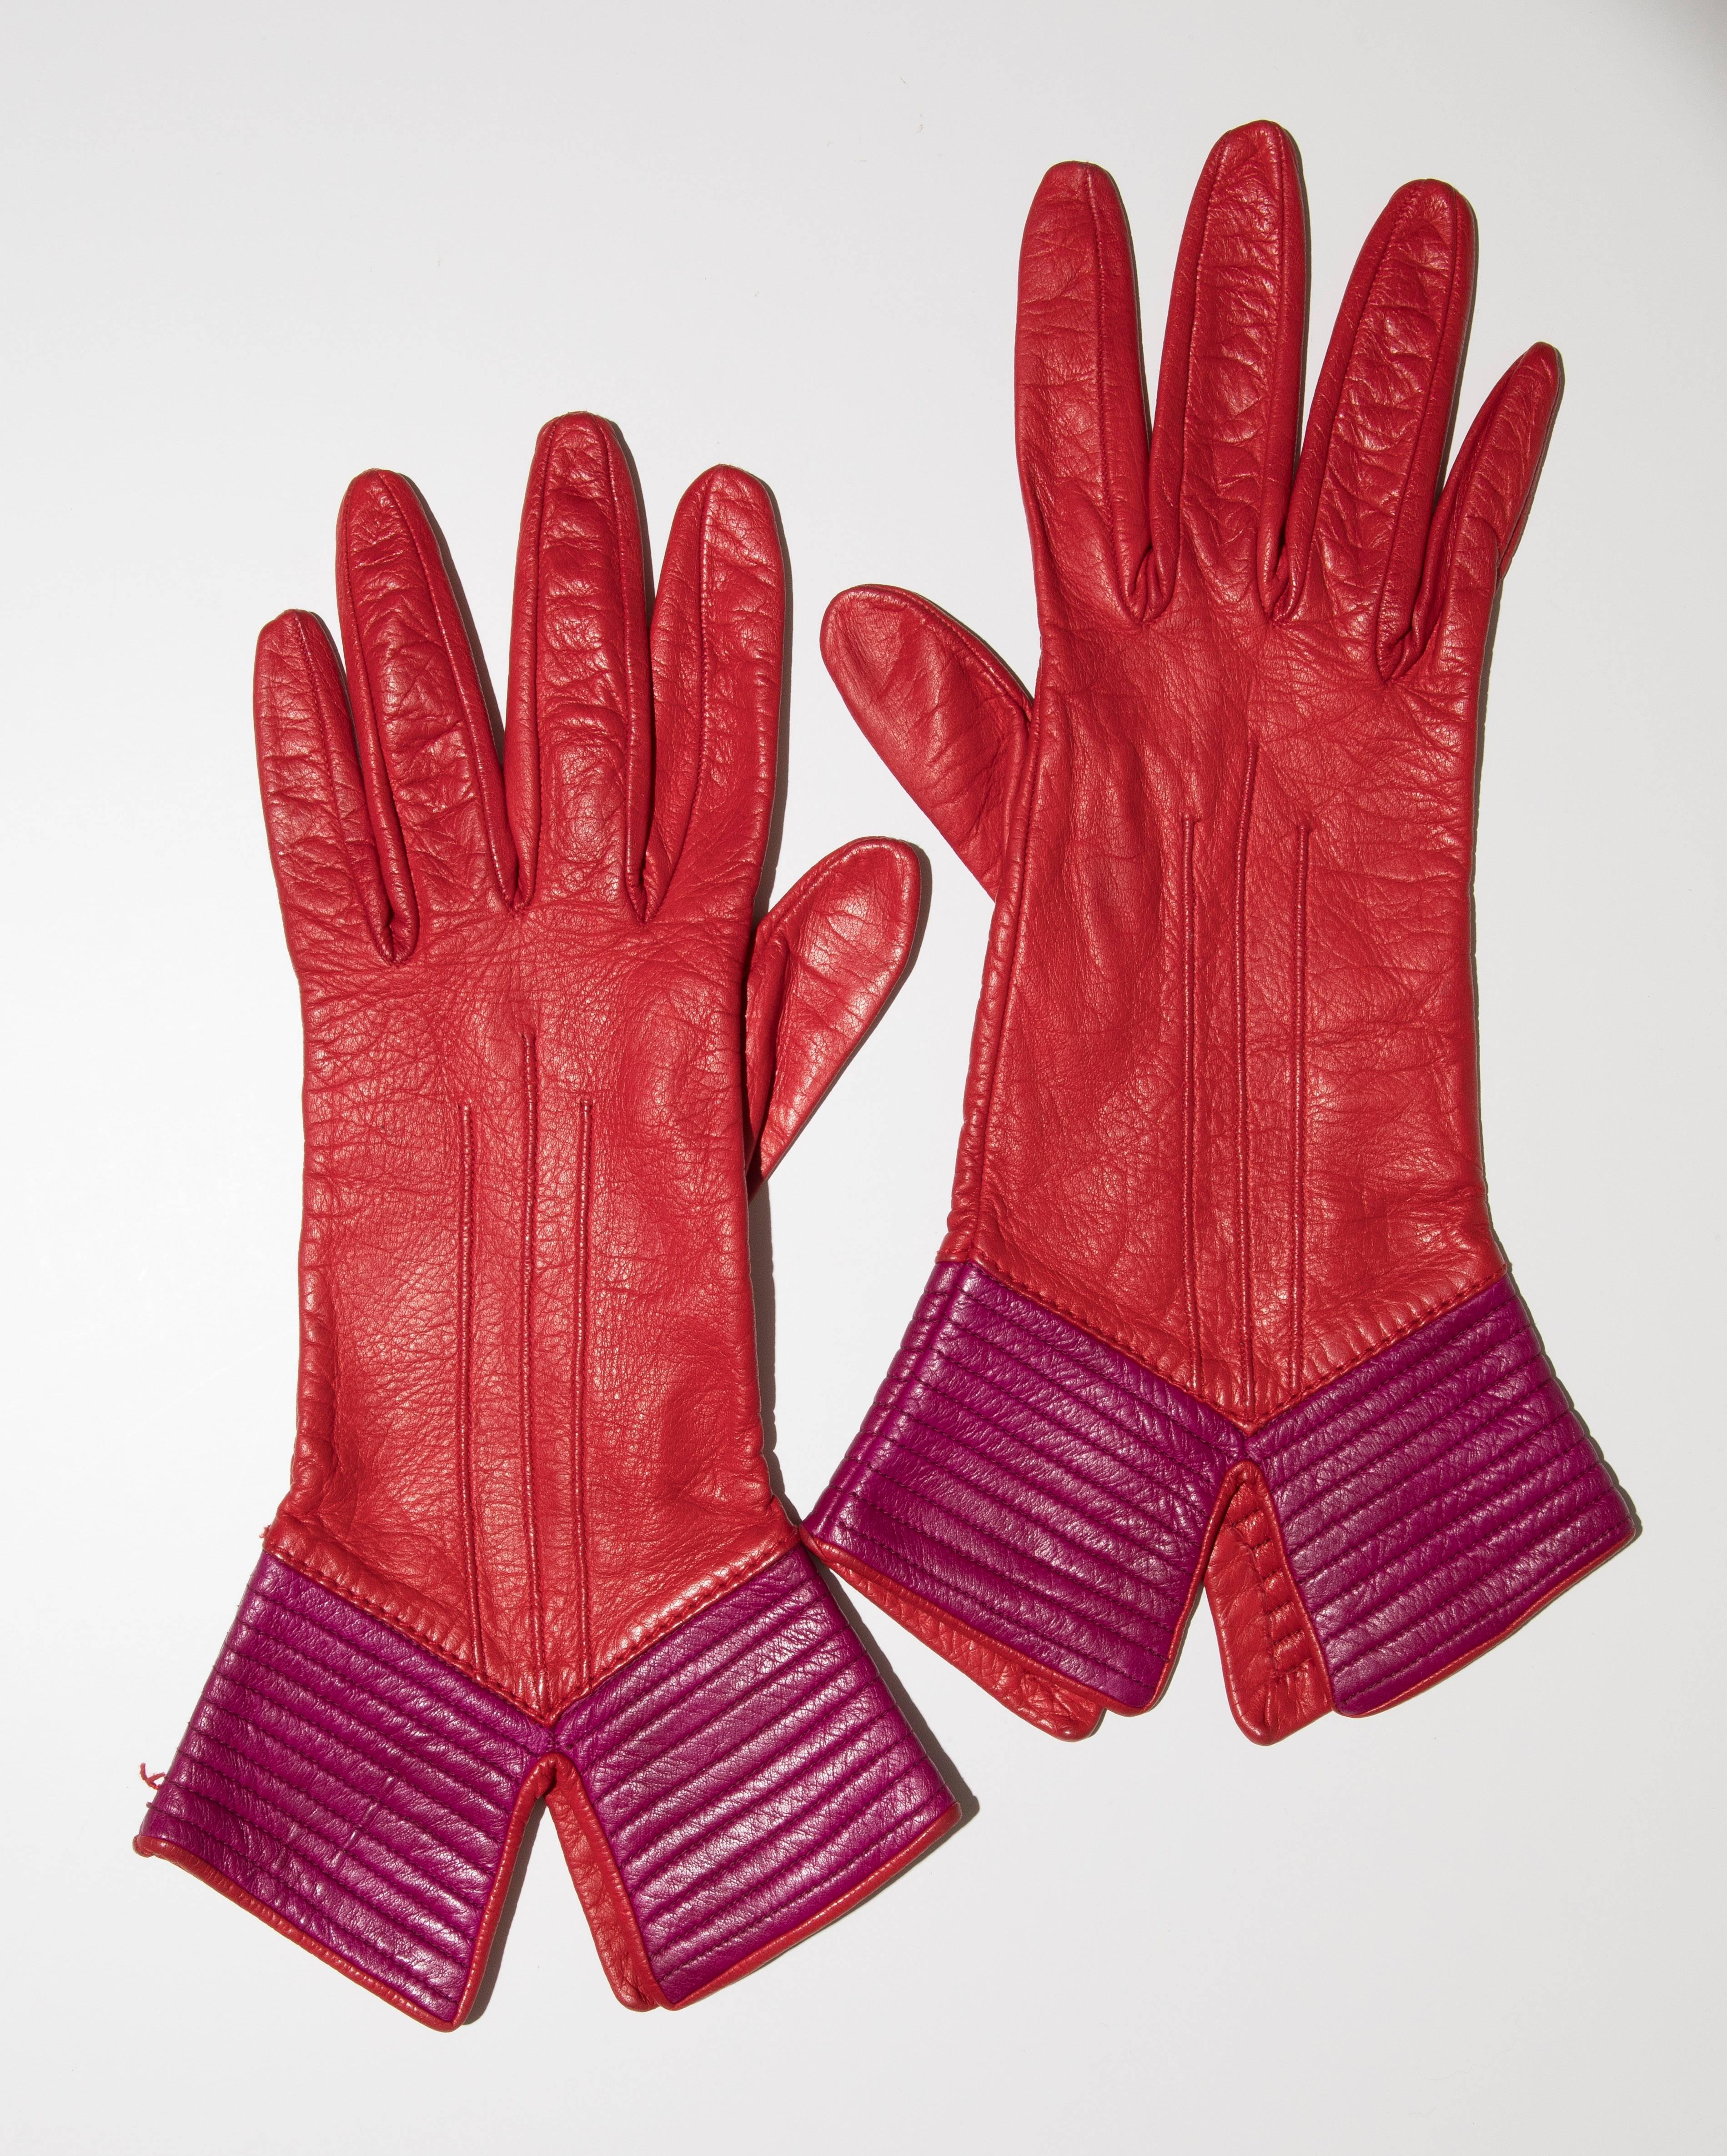 Yves Saint Laurent, circa 1970's red and purple color-block leather gloves featuring tonal stitching and lined in silk.

Size: Large

Length: 12